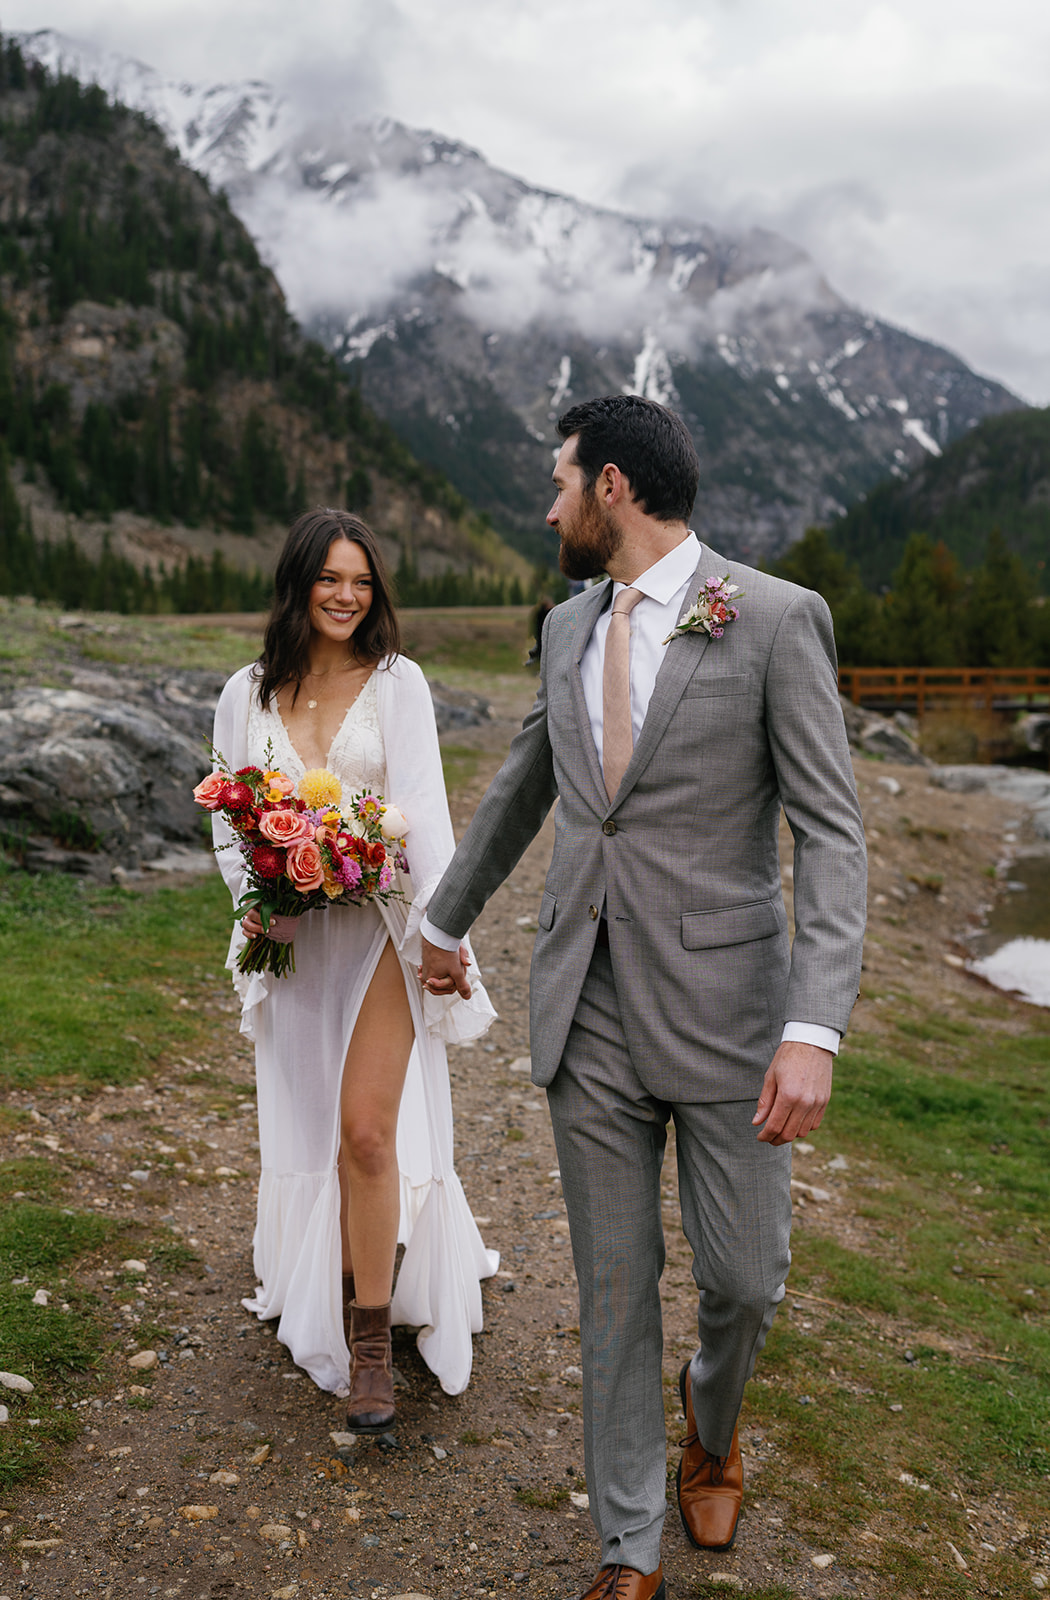 A groom leads his new bride down a mountain trail by the hand while she holds her large bouquet devils thumb ranch wedding